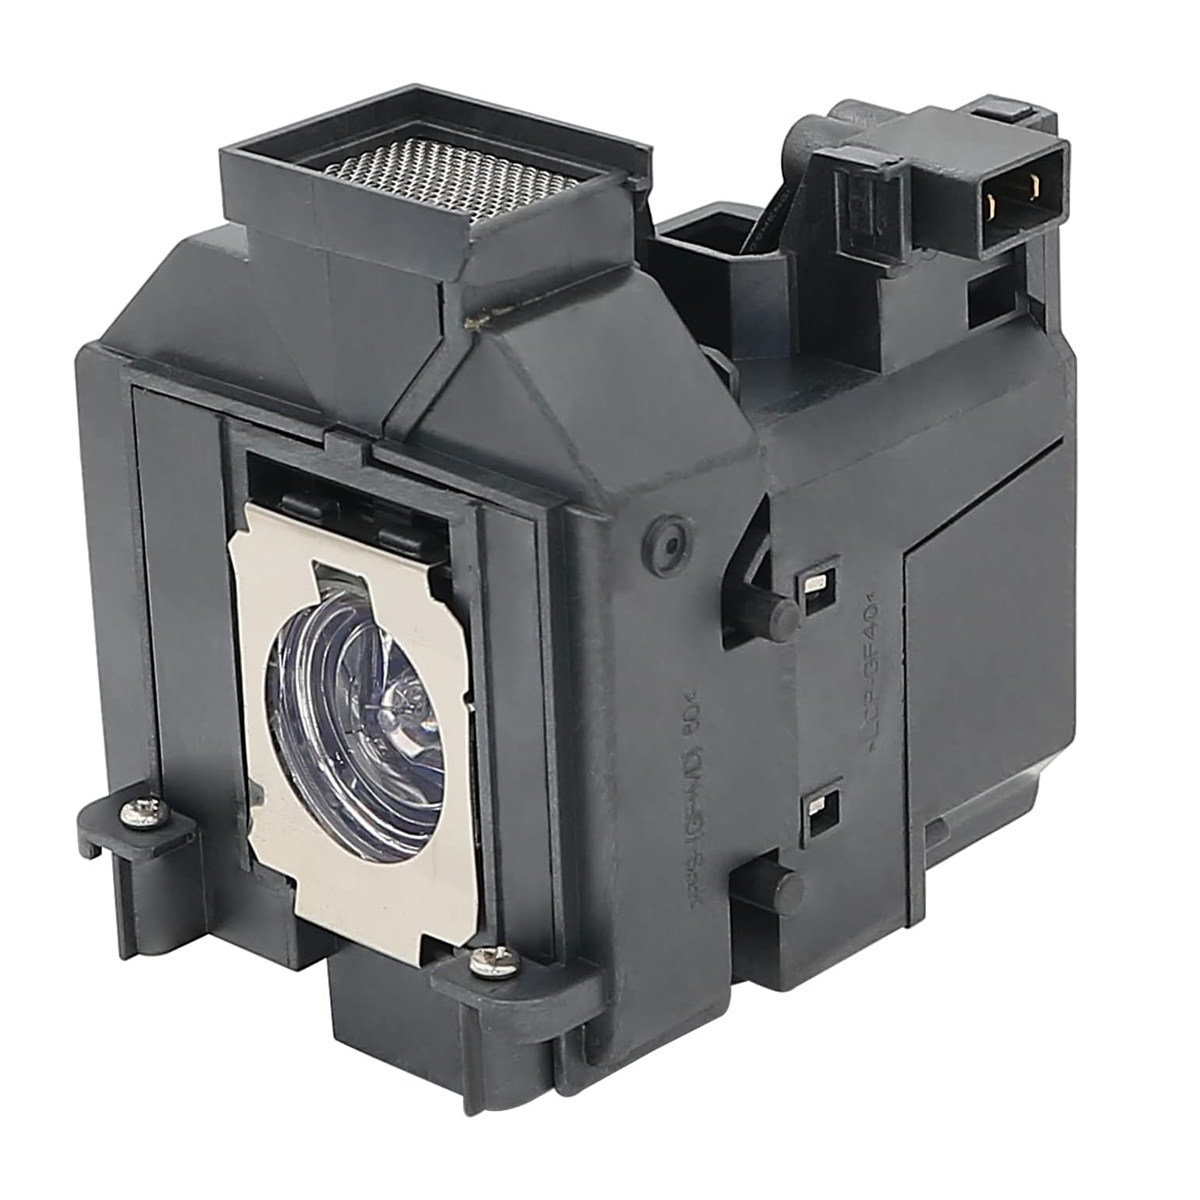 Replacement Projector lamp ELPLP69 For Epson EH-TW7200 EH-TW8000 EH-TW8100 EH-TW8200